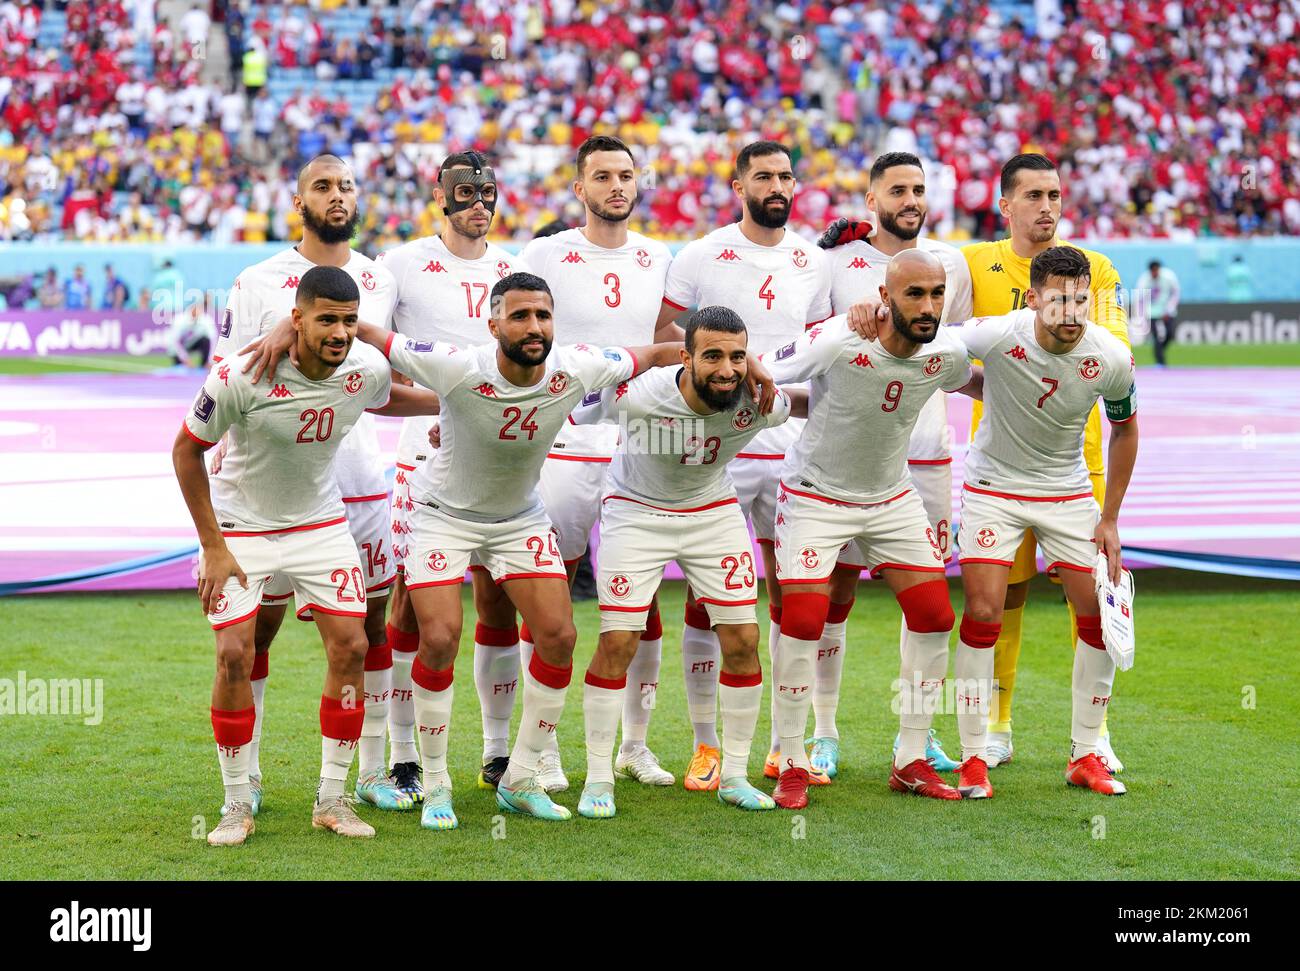 Tunisia's Aissa Laidouni, Ellyes Skhiri, Montassar Talbi, Yassine Meriah, Dylan Bronn, Aymen Dahmen, Mohamed Drager, Ali Abdi, Naim Sliti, Issam Jebali and Youssef Msakni line up on the pitch for a team photo ahead of the FIFA World Cup Group D match at the Al Janoub Stadium in Al-Wakrah, Qatar. Picture date: Saturday November 26, 2022. Stock Photo